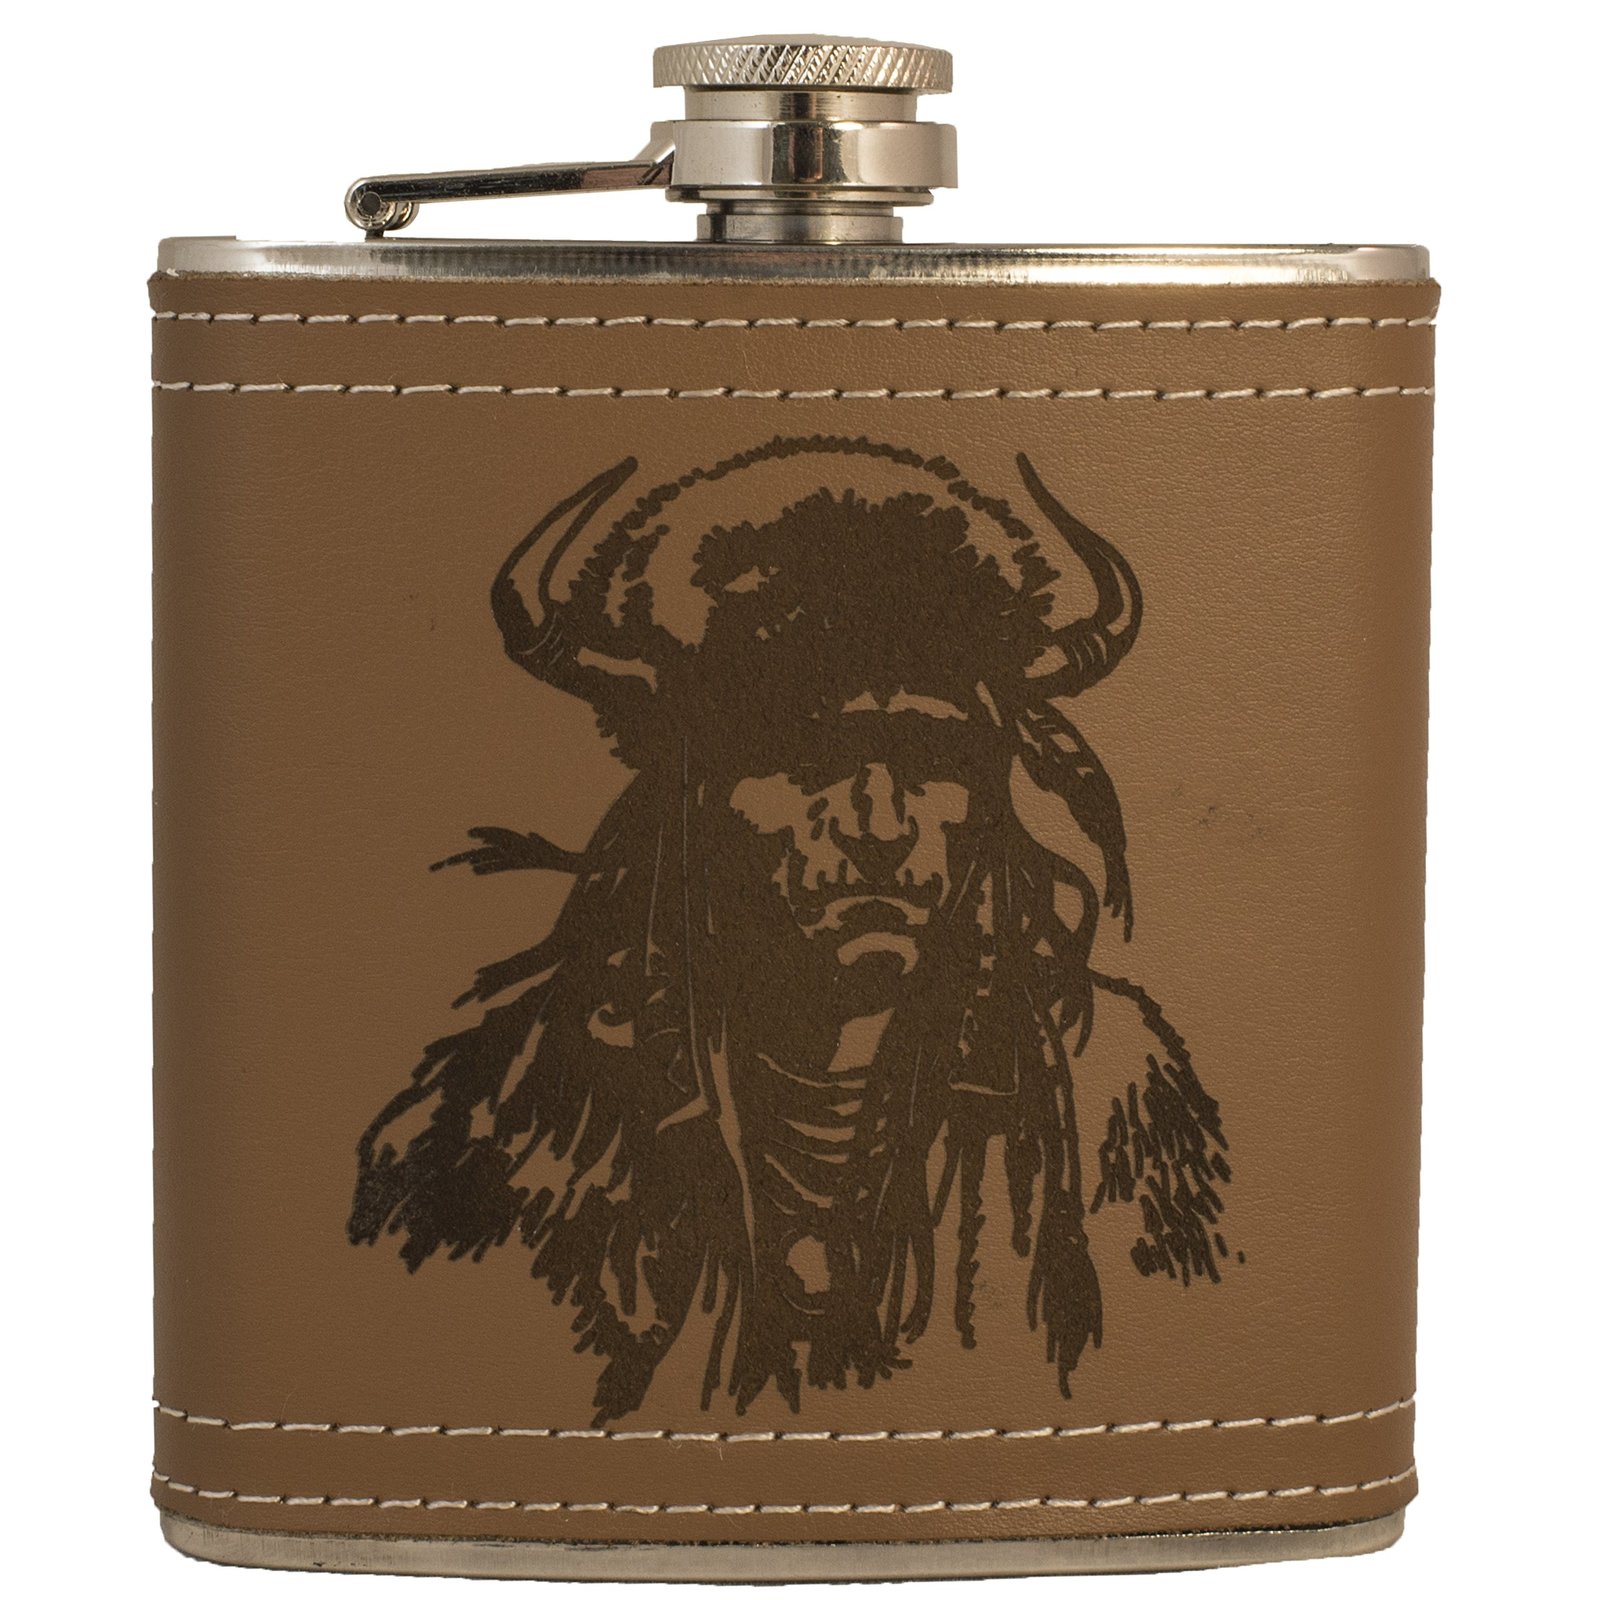 Primary image for 6oz Native Warrior Leather Flask KLB